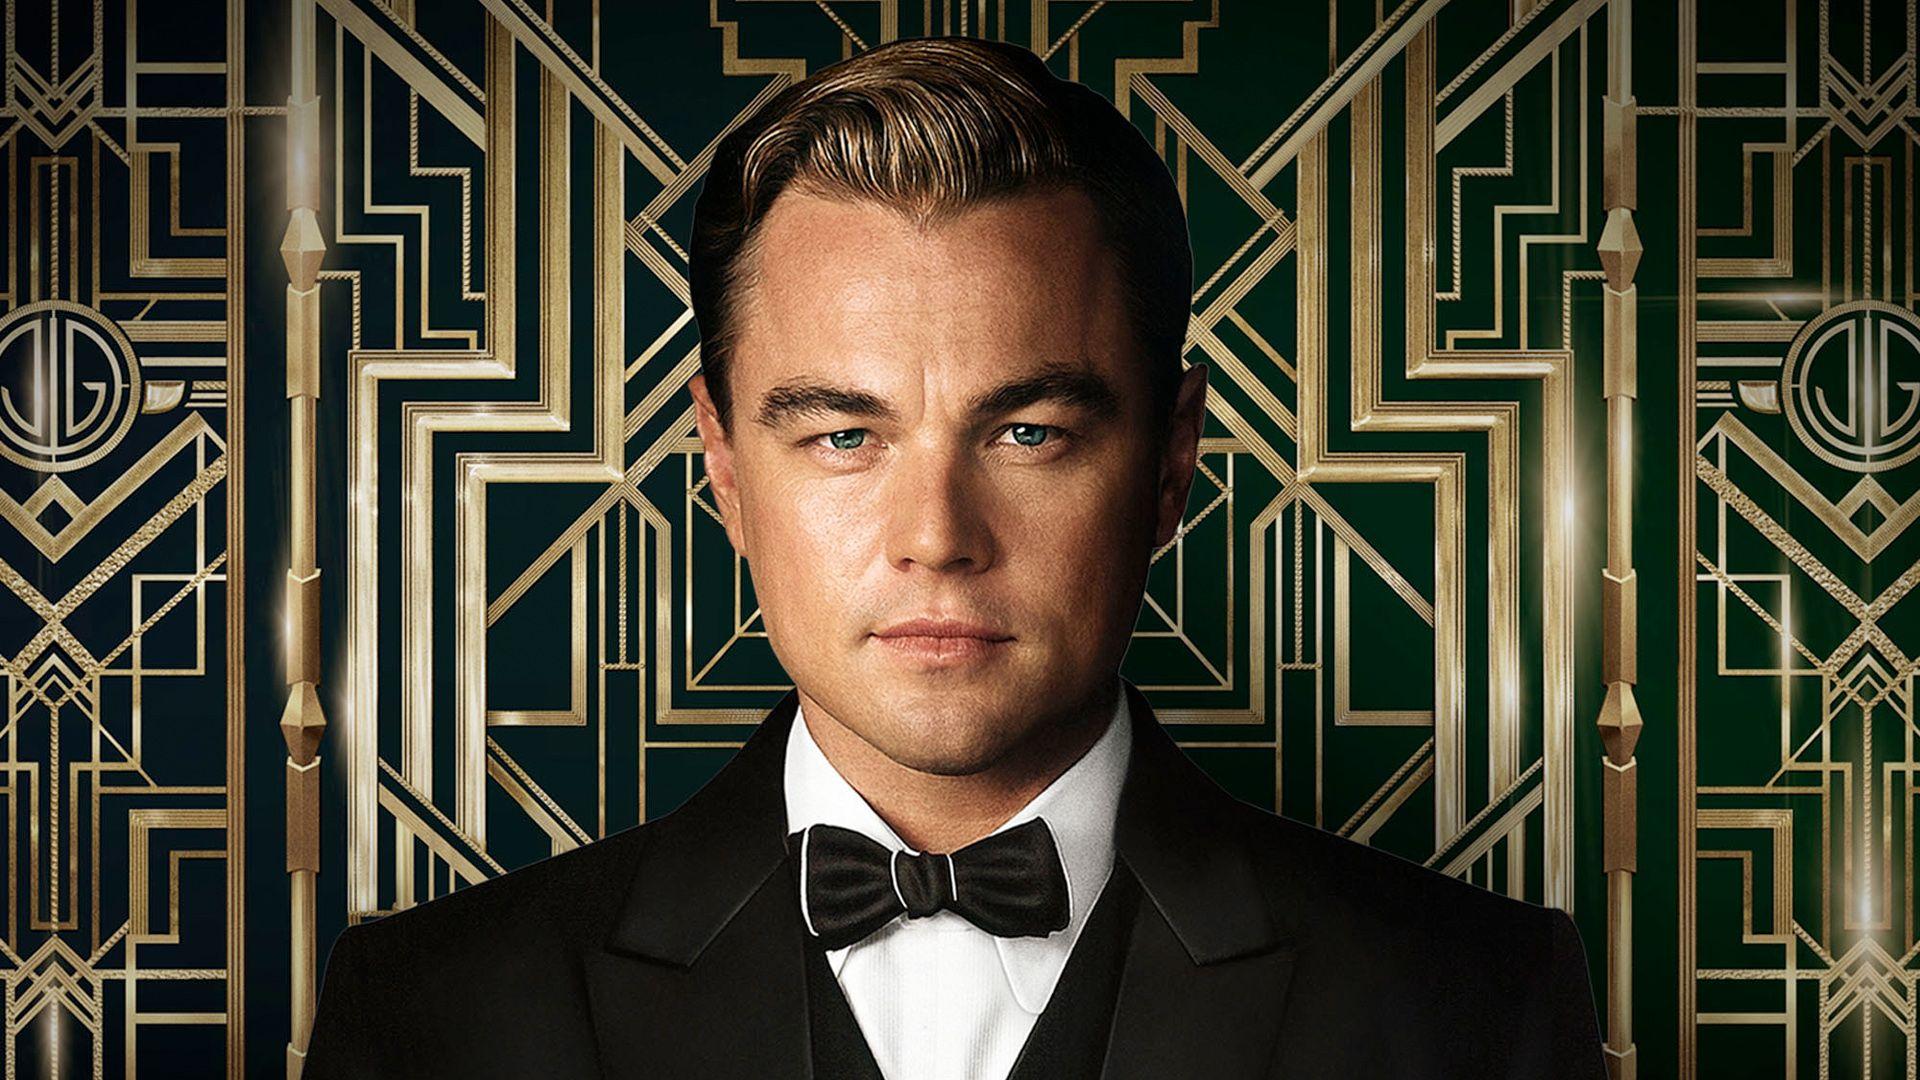 The Great Gatsby wallpaperx1080